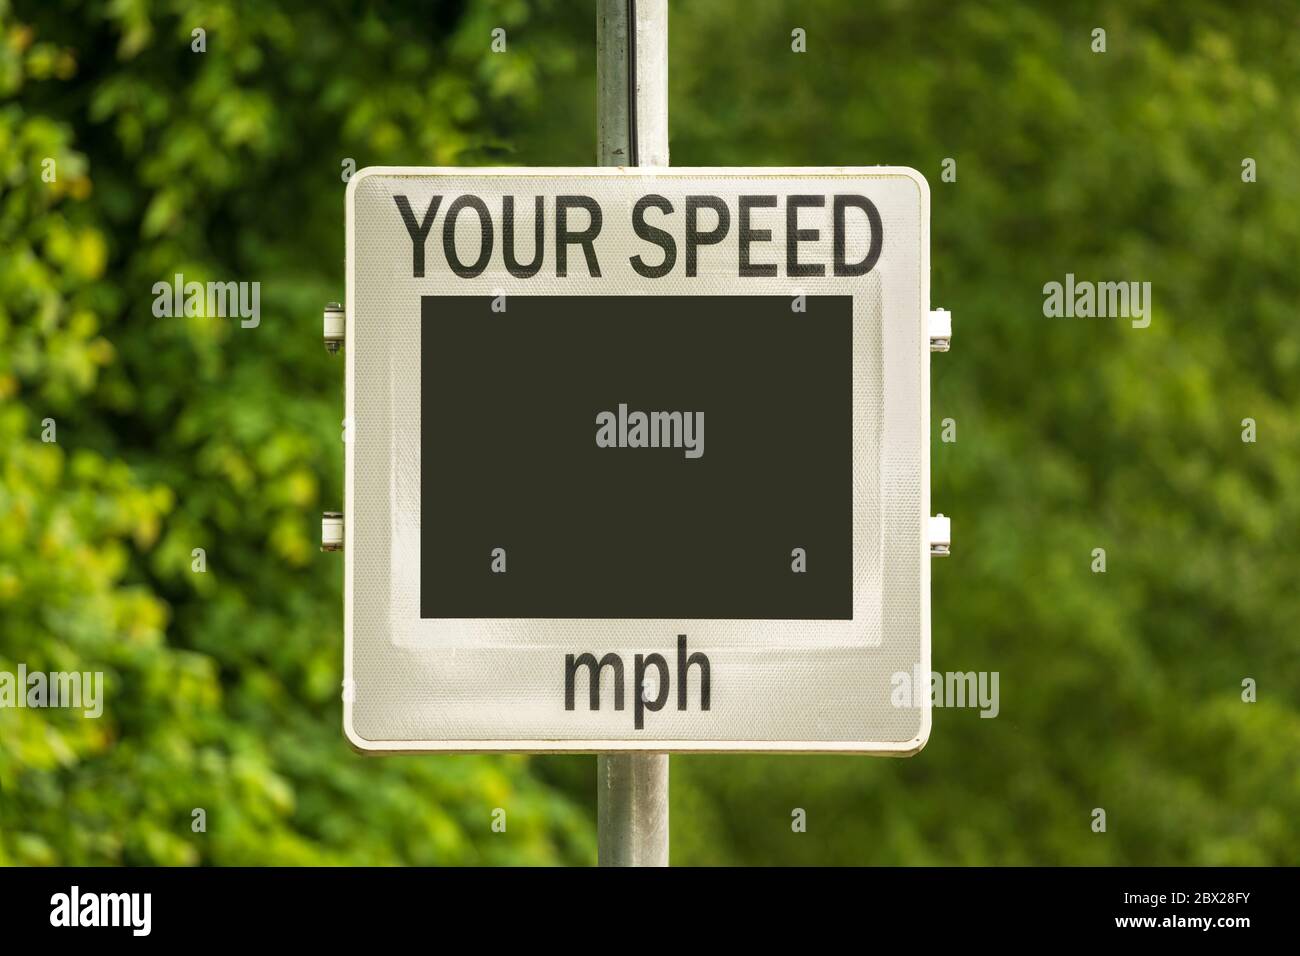 Speed Indicator Device (SID) that measures and displays speed of approaching cars. Blank screen. UK. Other screen variations available in my portfolio. Stock Photo